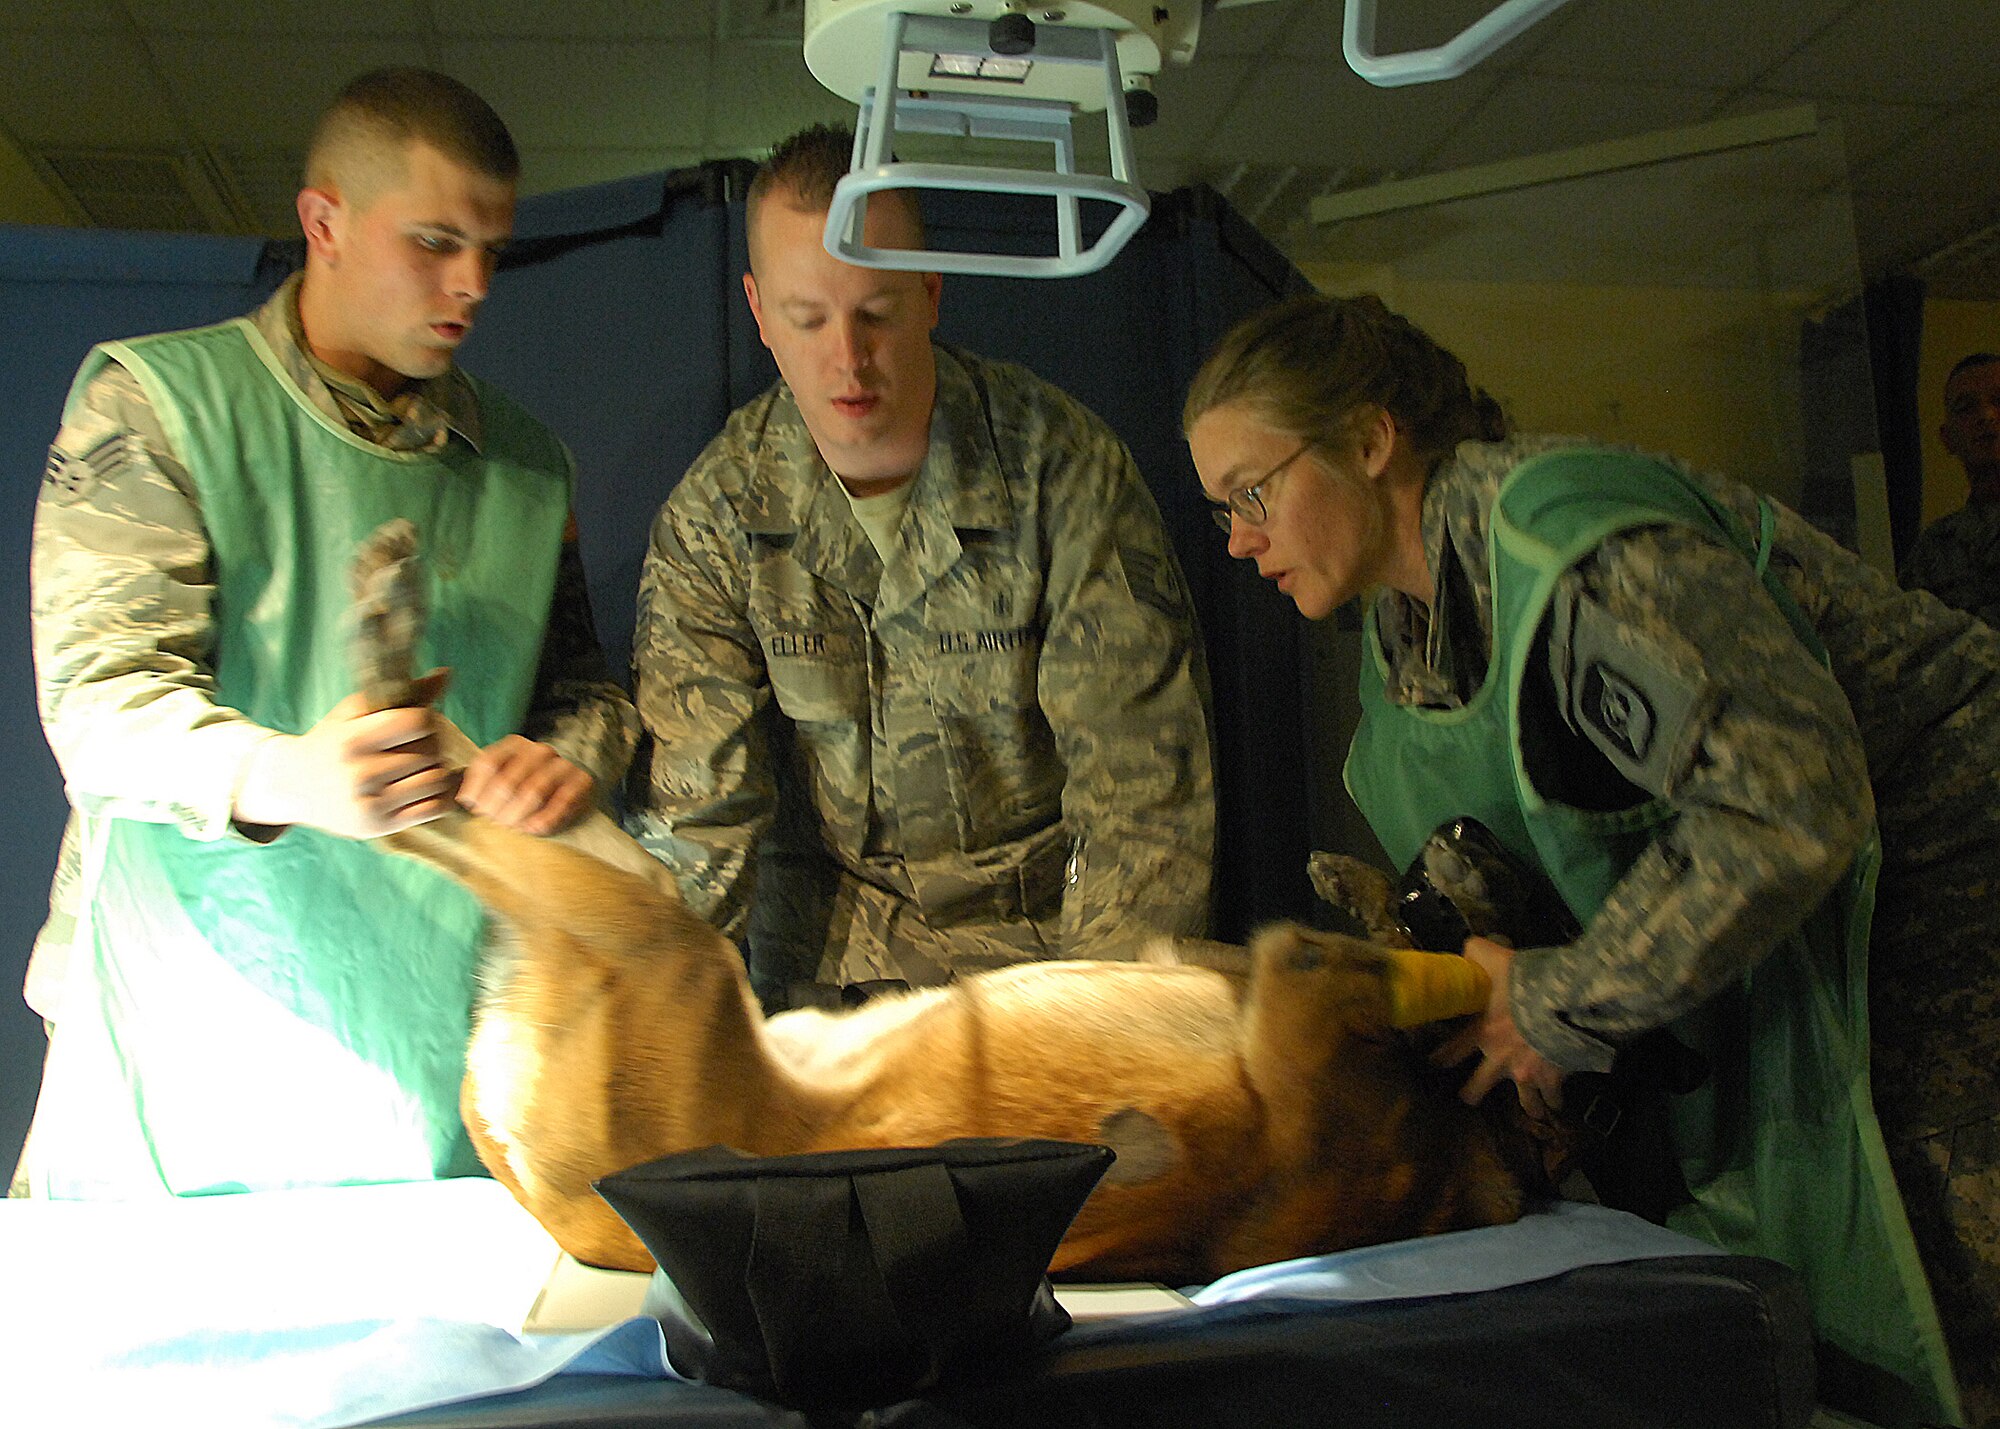 SOUTHWEST ASIA -- Army Capt. Elizabeth Williams, 218th Medical Detachment Veterinarian, right, Tech. Sgt. Jeffrey Eller and Senior Airman Daren Marshall help align military working dog Zack on a table before receiving a chest X-ray on Dec. 13 at an air base in Southwest Asia. Zack received an X-ray to see how his pneumonia has cleared since his last visit. Sergeant Eller is an X-ray technician assigned to the 386th Expeditionary Medical Group and is deployed from Wright-Patterson Air Force Base, Ohio. Airman Marshall is a military dog handler assigned to the 386th Expeditionary Security Forces Squadron and is deployed from F.E. Warren Air Force Base, Wyo. (U.S. Air Force photo/Tech. Sgt. Raheem Moore)